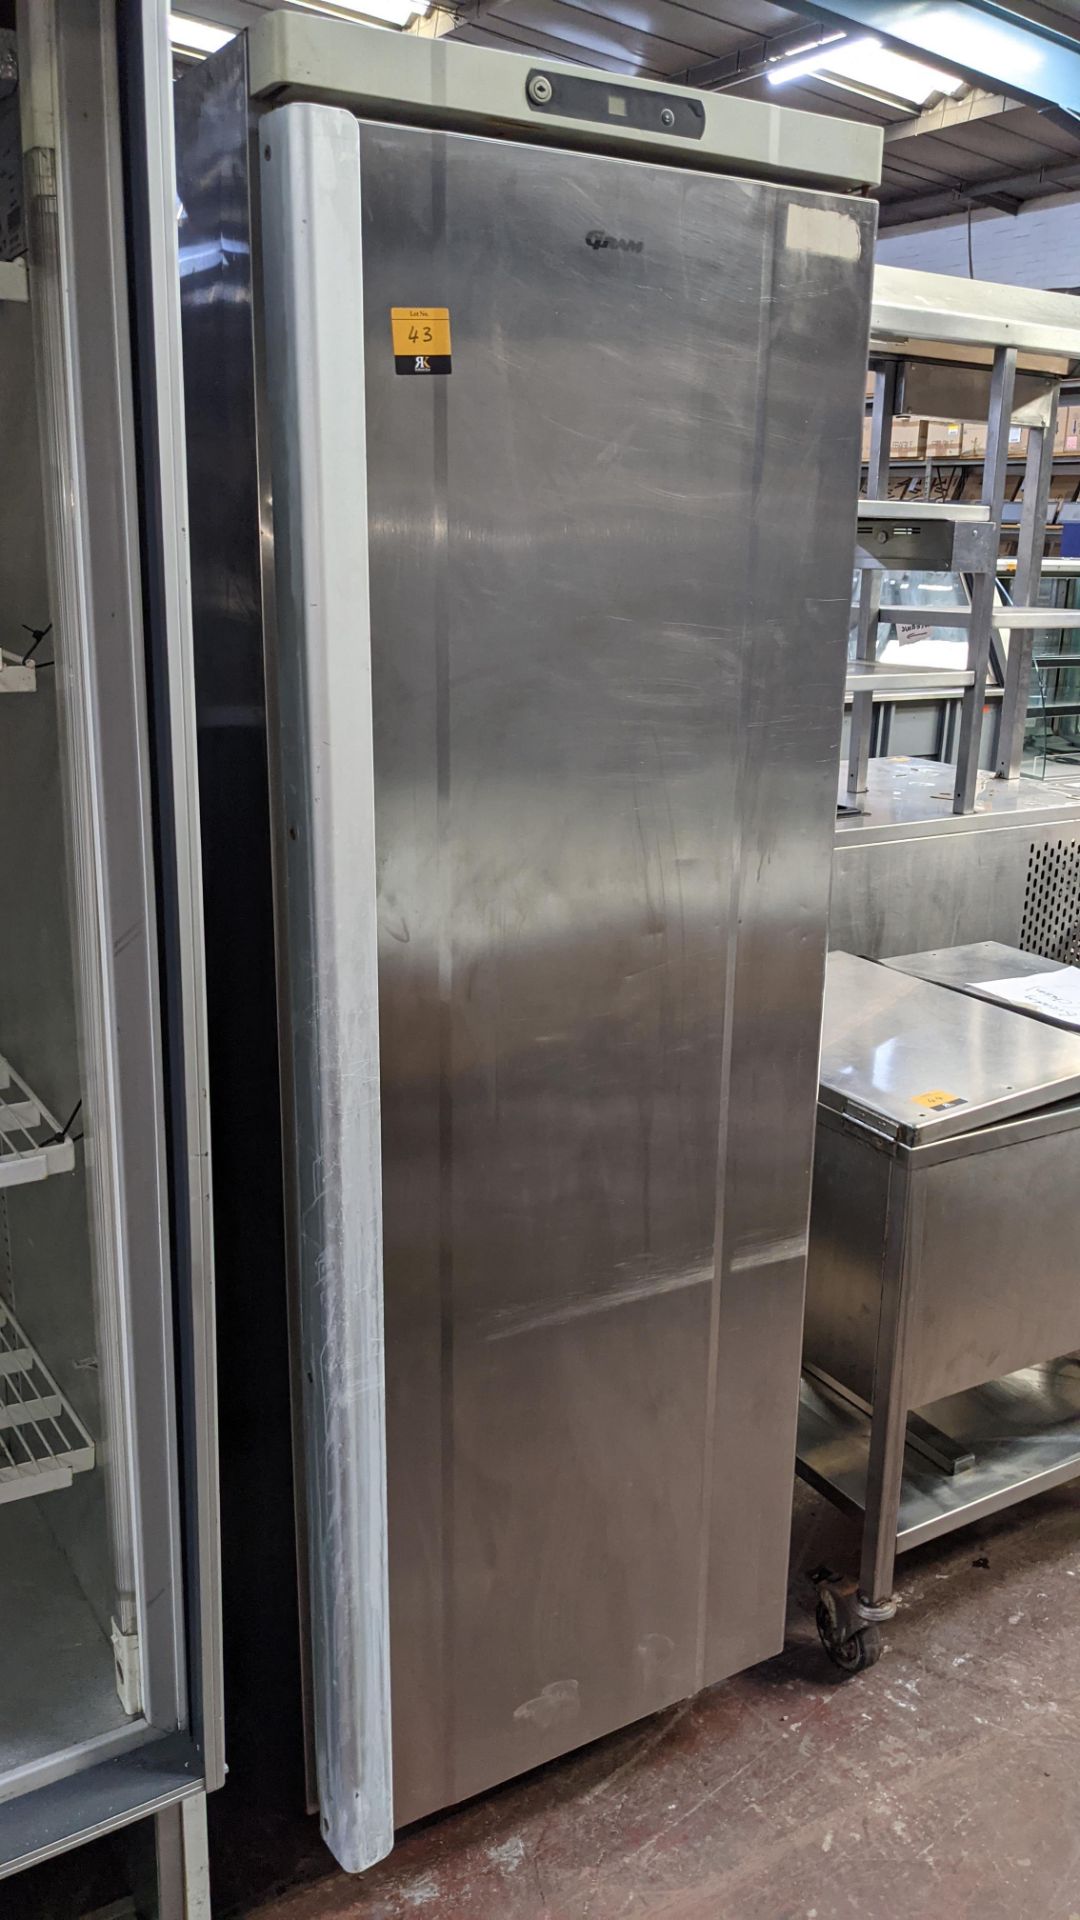 Gram stainless steel upright mobile freezer - Image 2 of 5